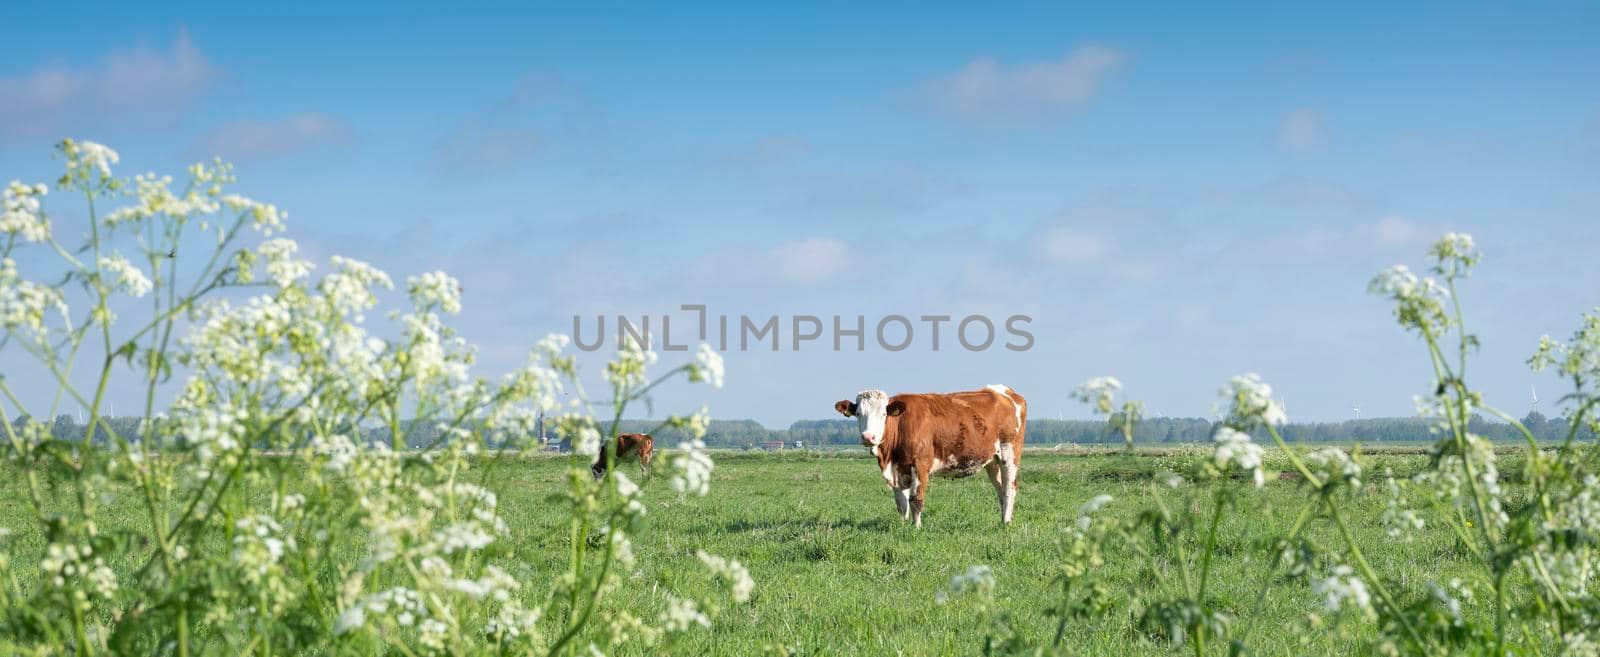 spotted red and white cows in meadow with spring flowers under blue sky in holland